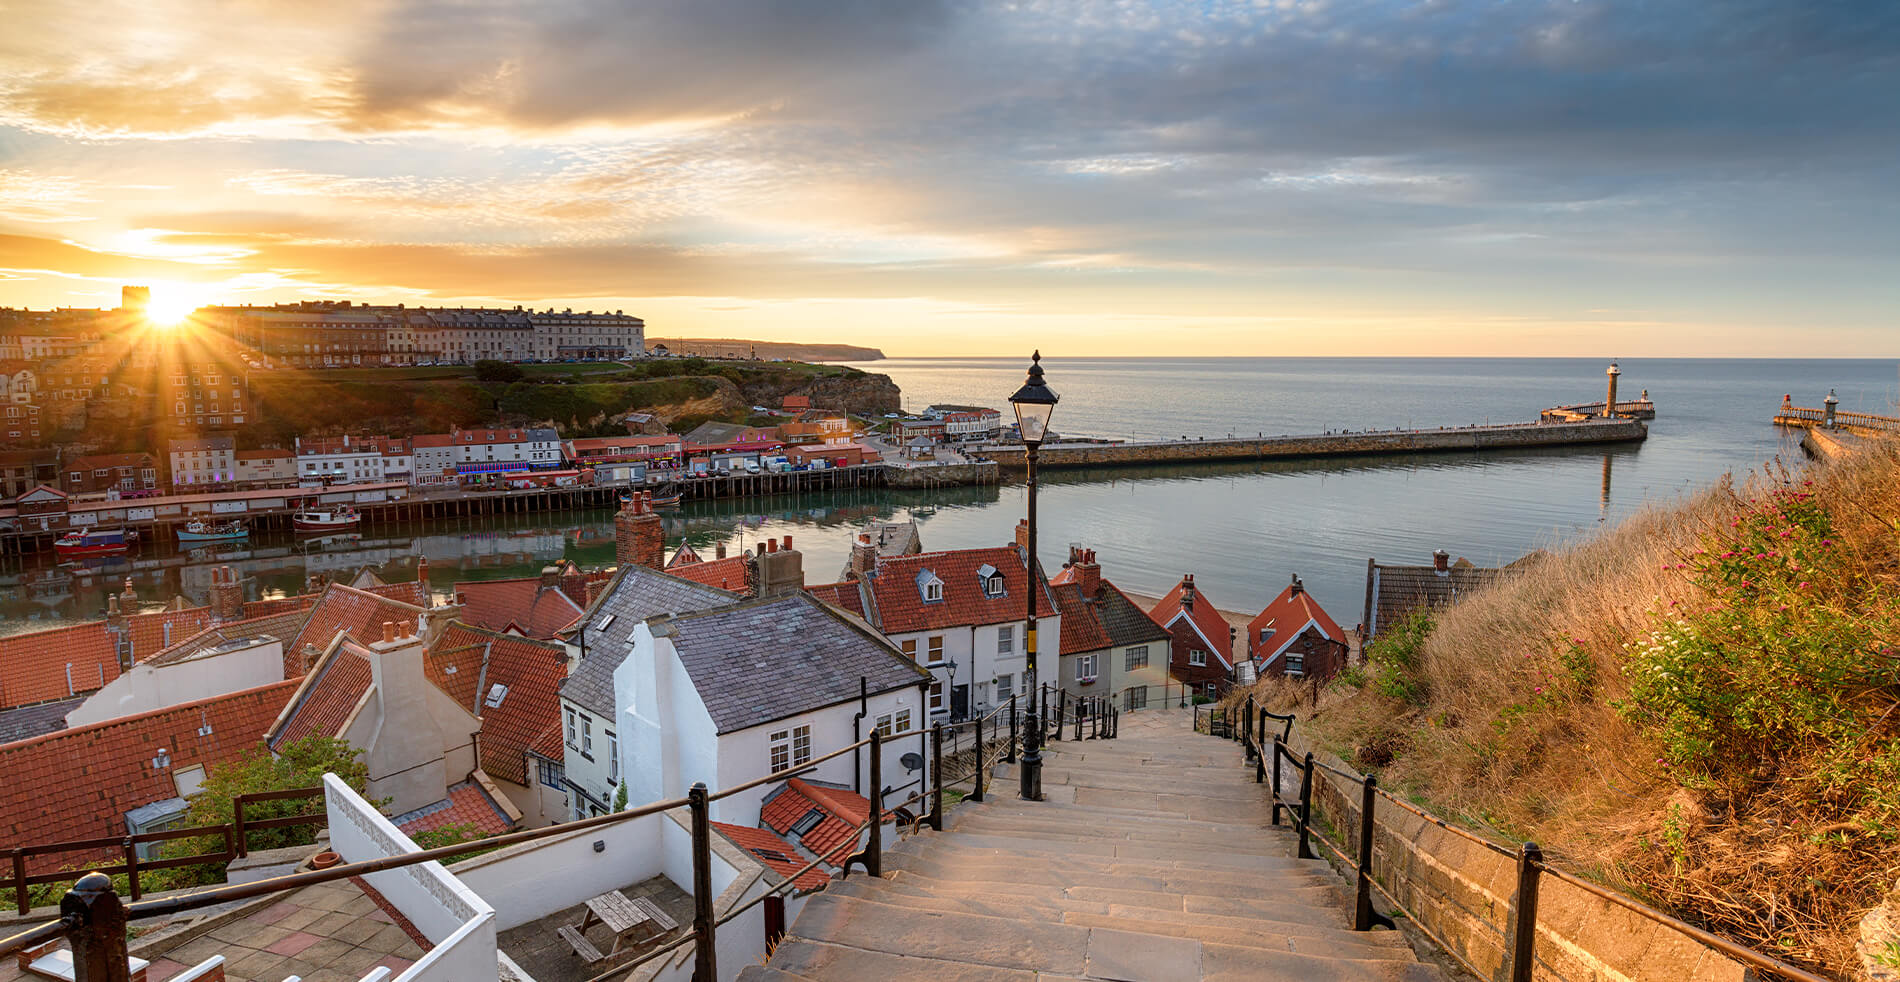 Our Guide to Great Places to Visit in Fabulous Yorkshire